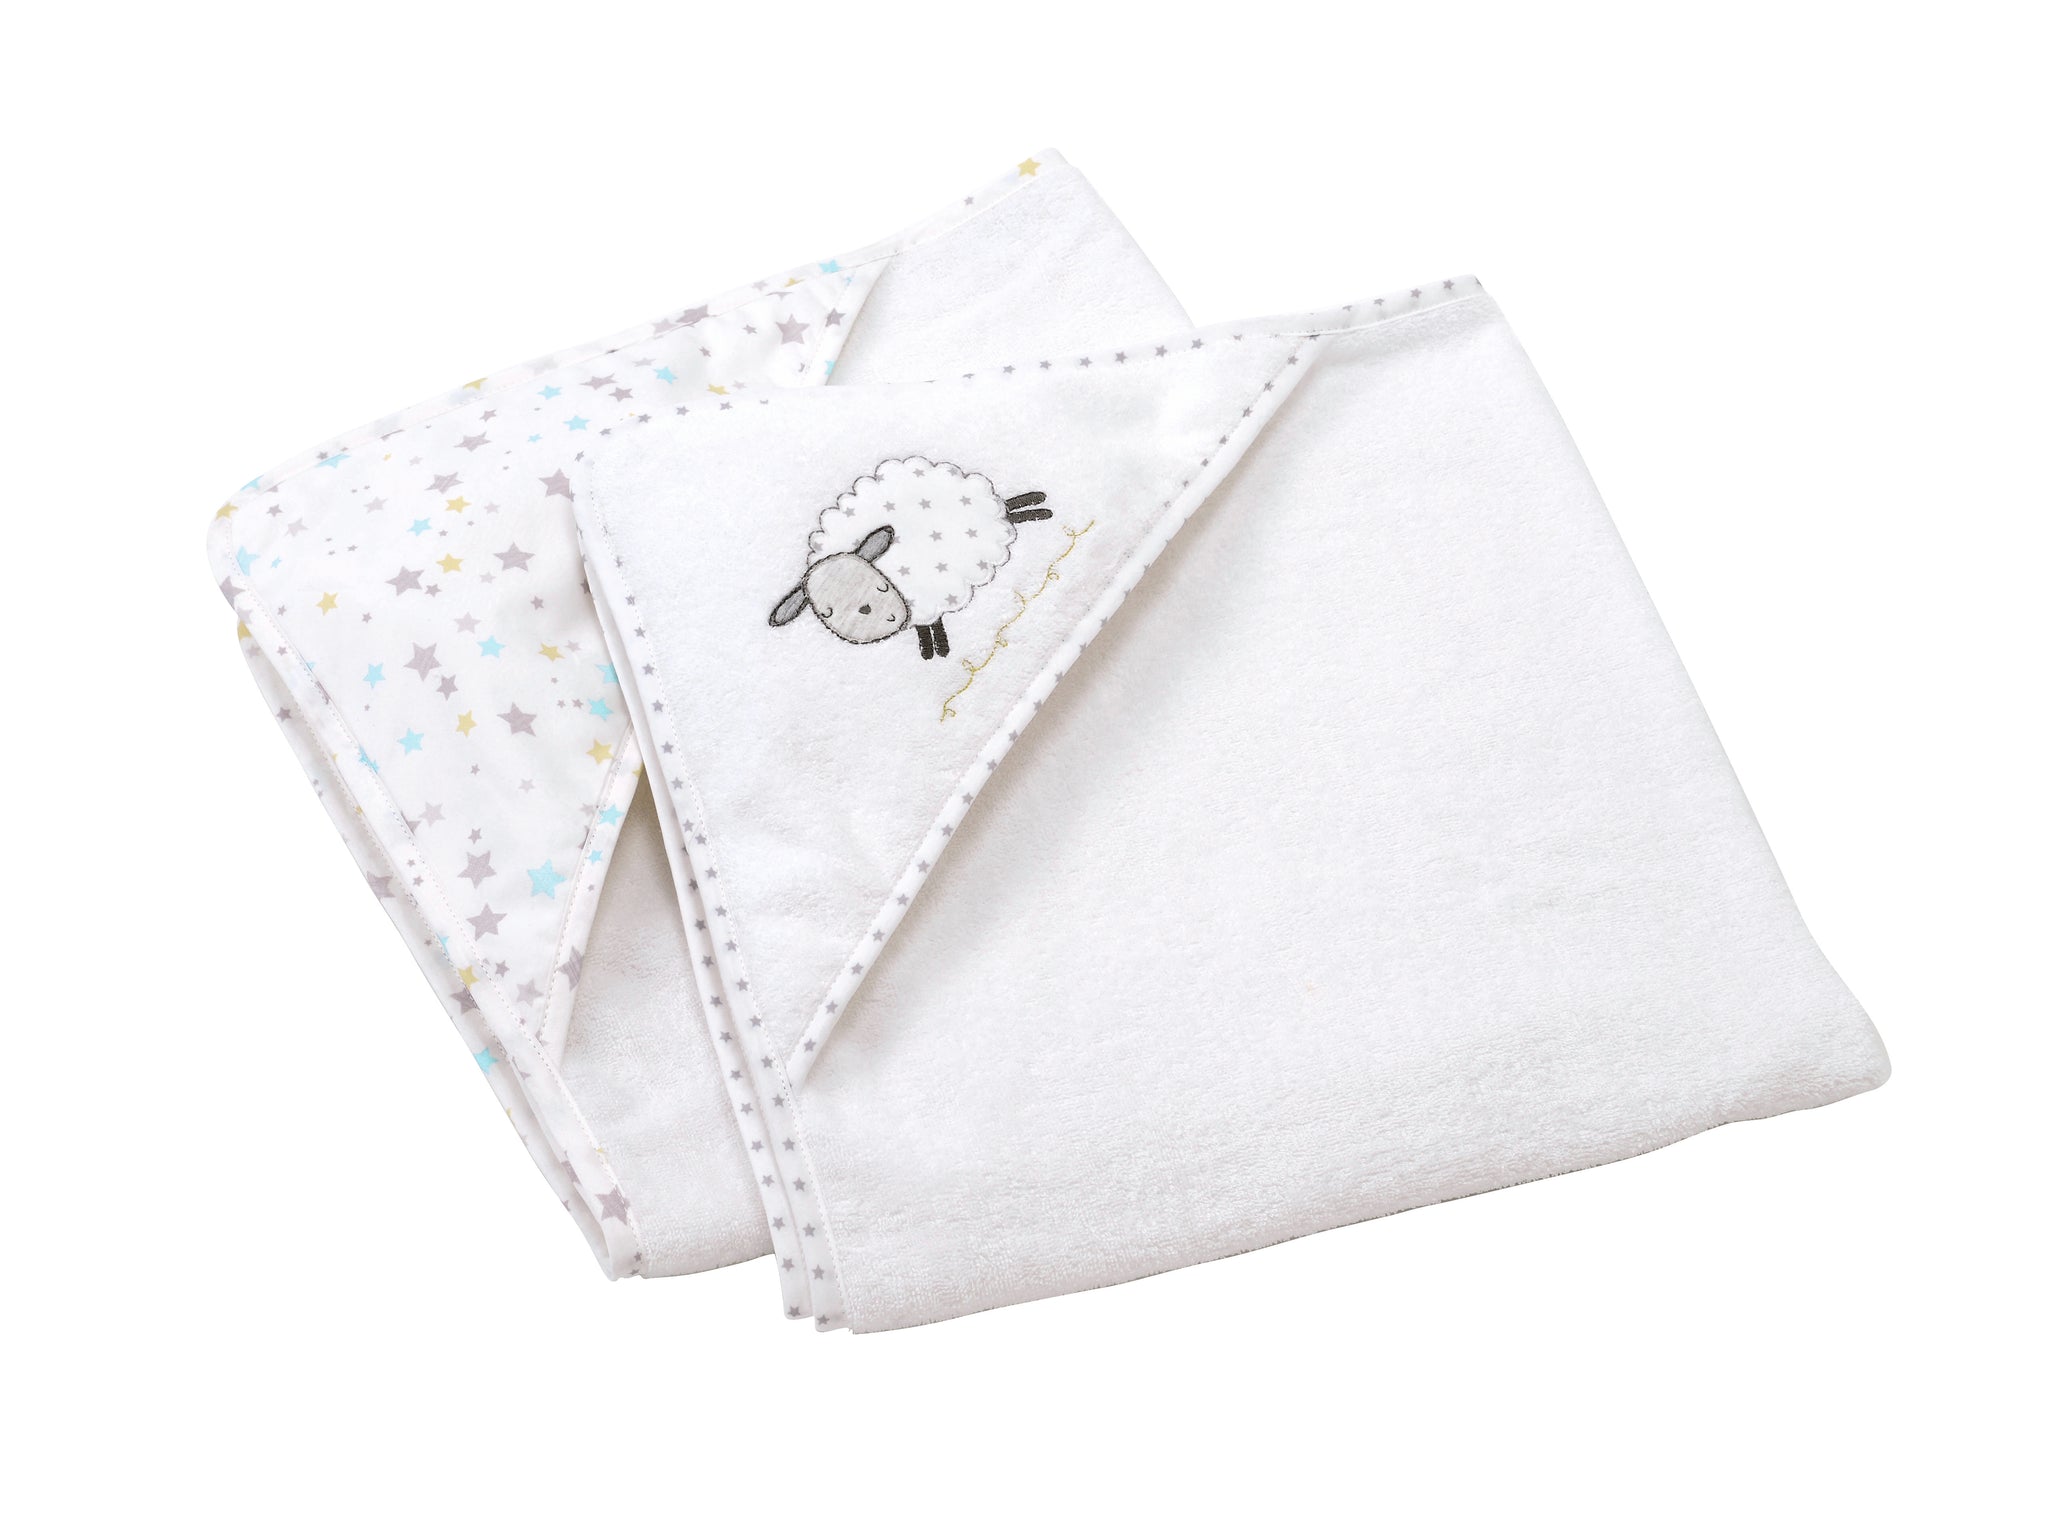 Counting Sheep Hooded Towels